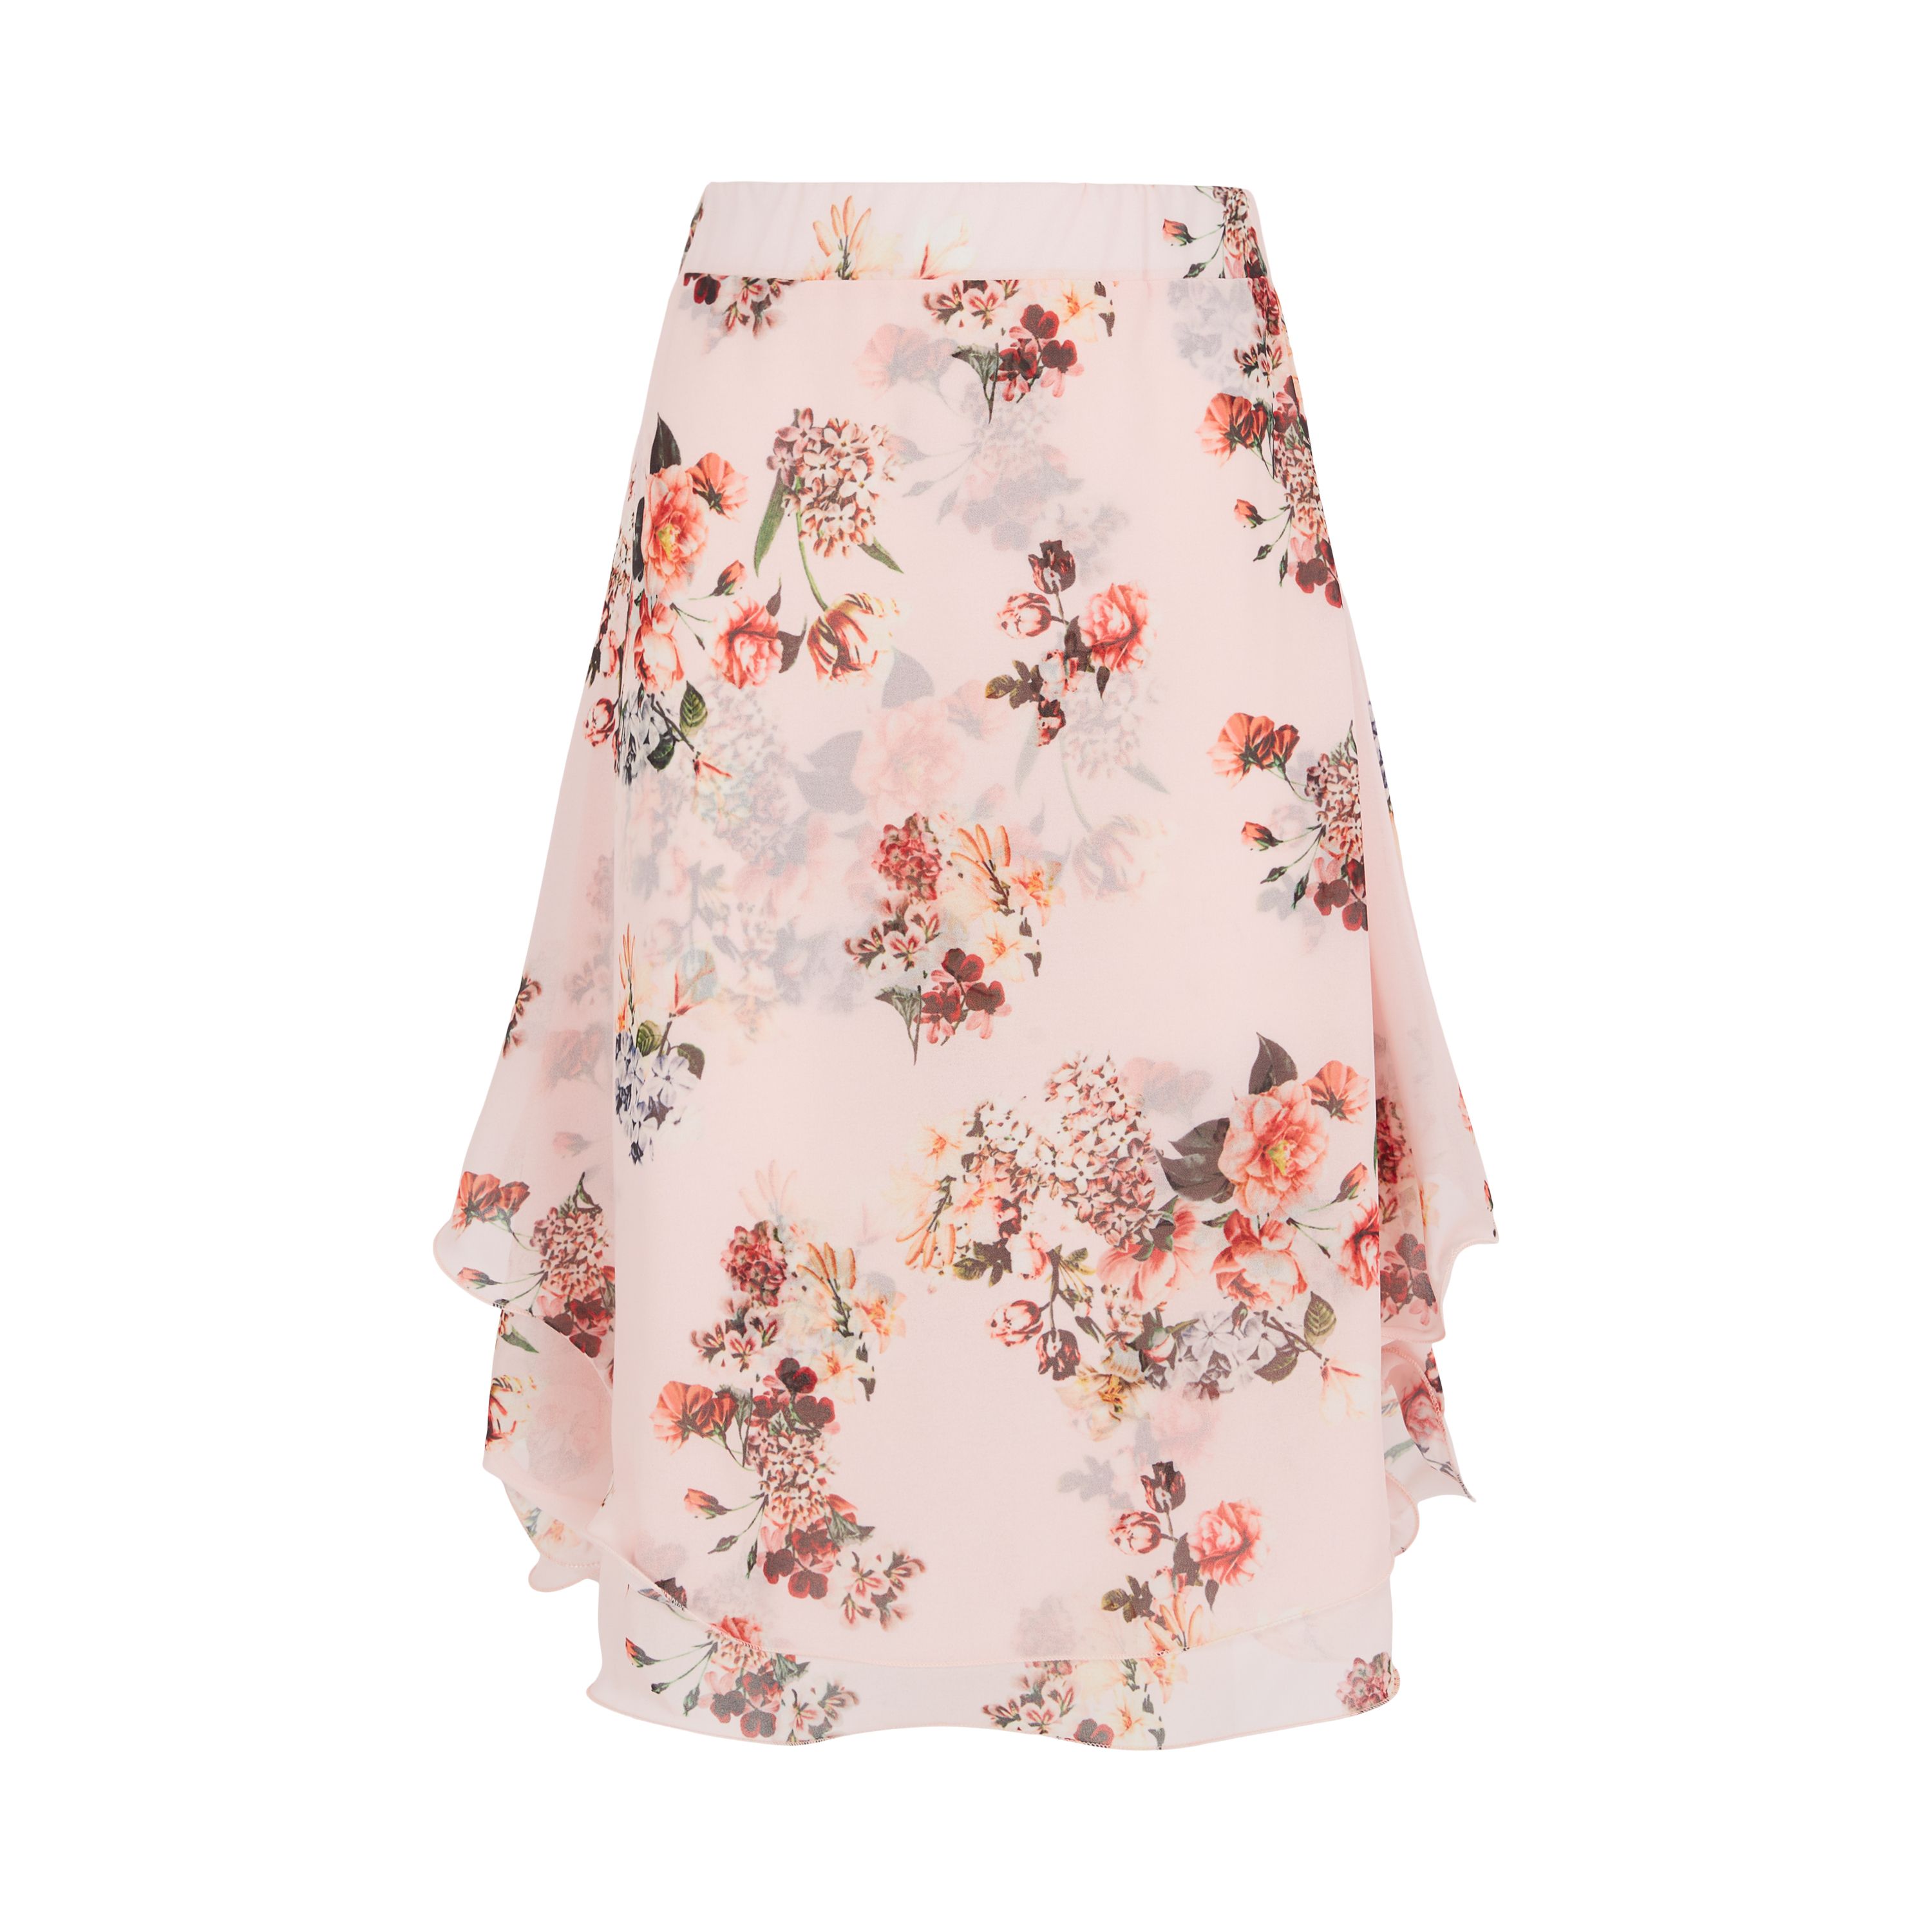 For a feminine twist, this James Lakeland classic is perfect for the summer months. Featuring a floral design, elasticated waist, structured wave hem, double layer fabric and falls to the knee